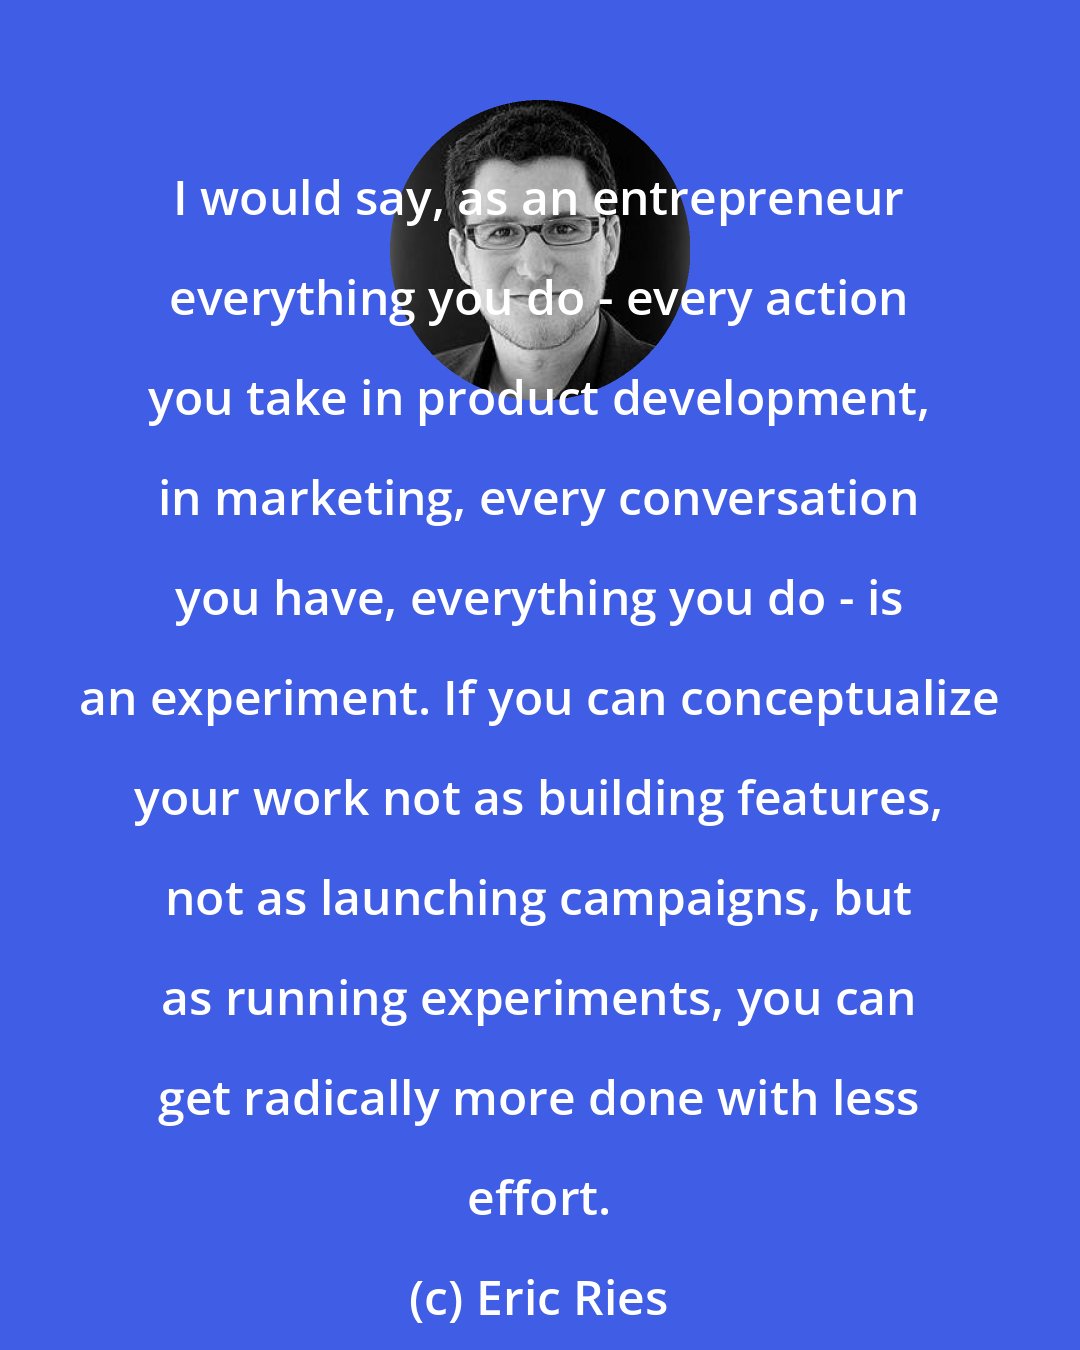 Eric Ries: I would say, as an entrepreneur everything you do - every action you take in product development, in marketing, every conversation you have, everything you do - is an experiment. If you can conceptualize your work not as building features, not as launching campaigns, but as running experiments, you can get radically more done with less effort.